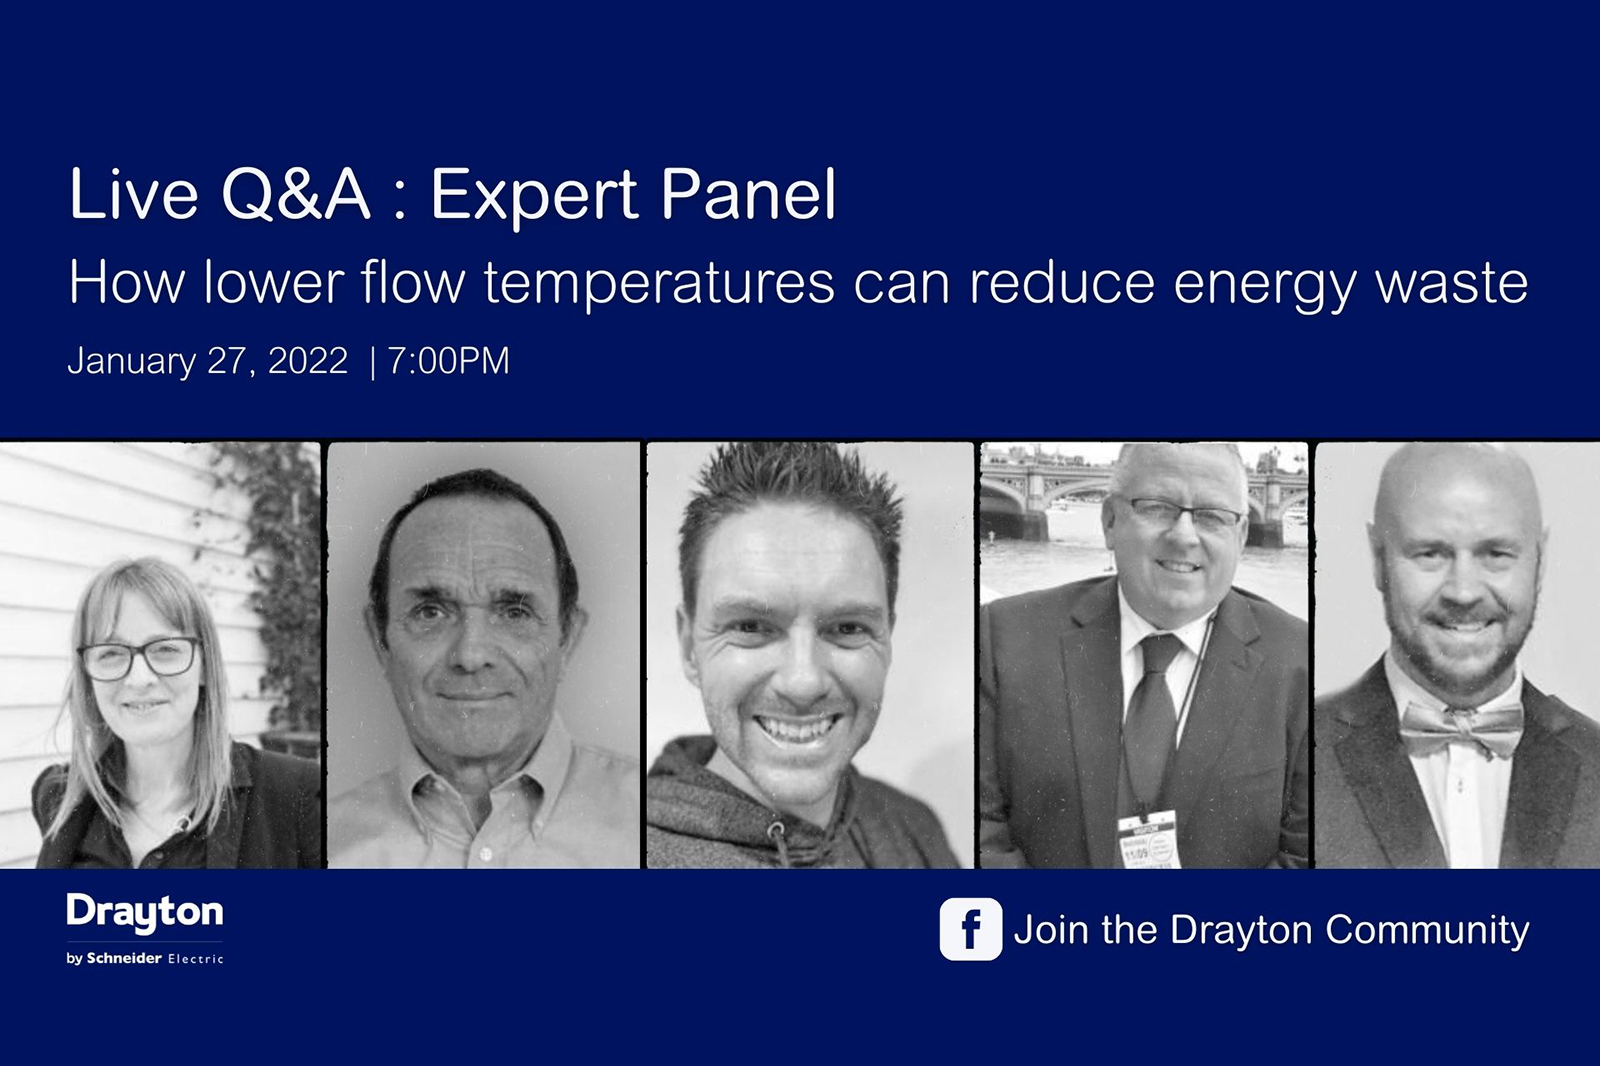 Drayton to host live expert panel on low flow temperatures